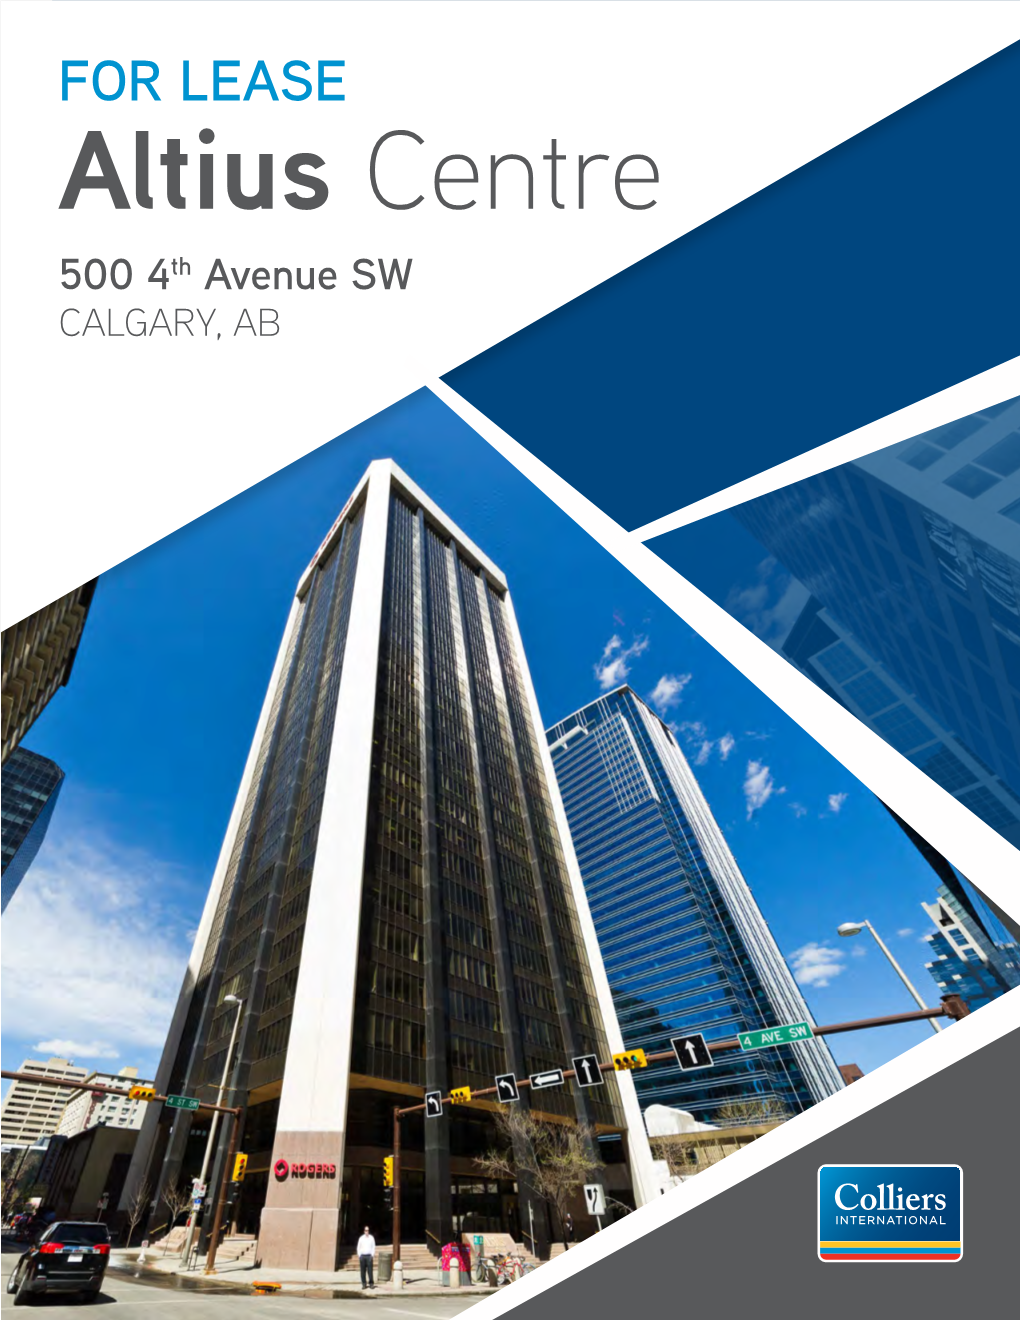 Altius Centre 500 4Th Avenue SW CALGARY, AB Altius Centre Is a 324,000 Square Foot, 32-Storey Office Building in Downtown Calgary Situated at a Prominent Location